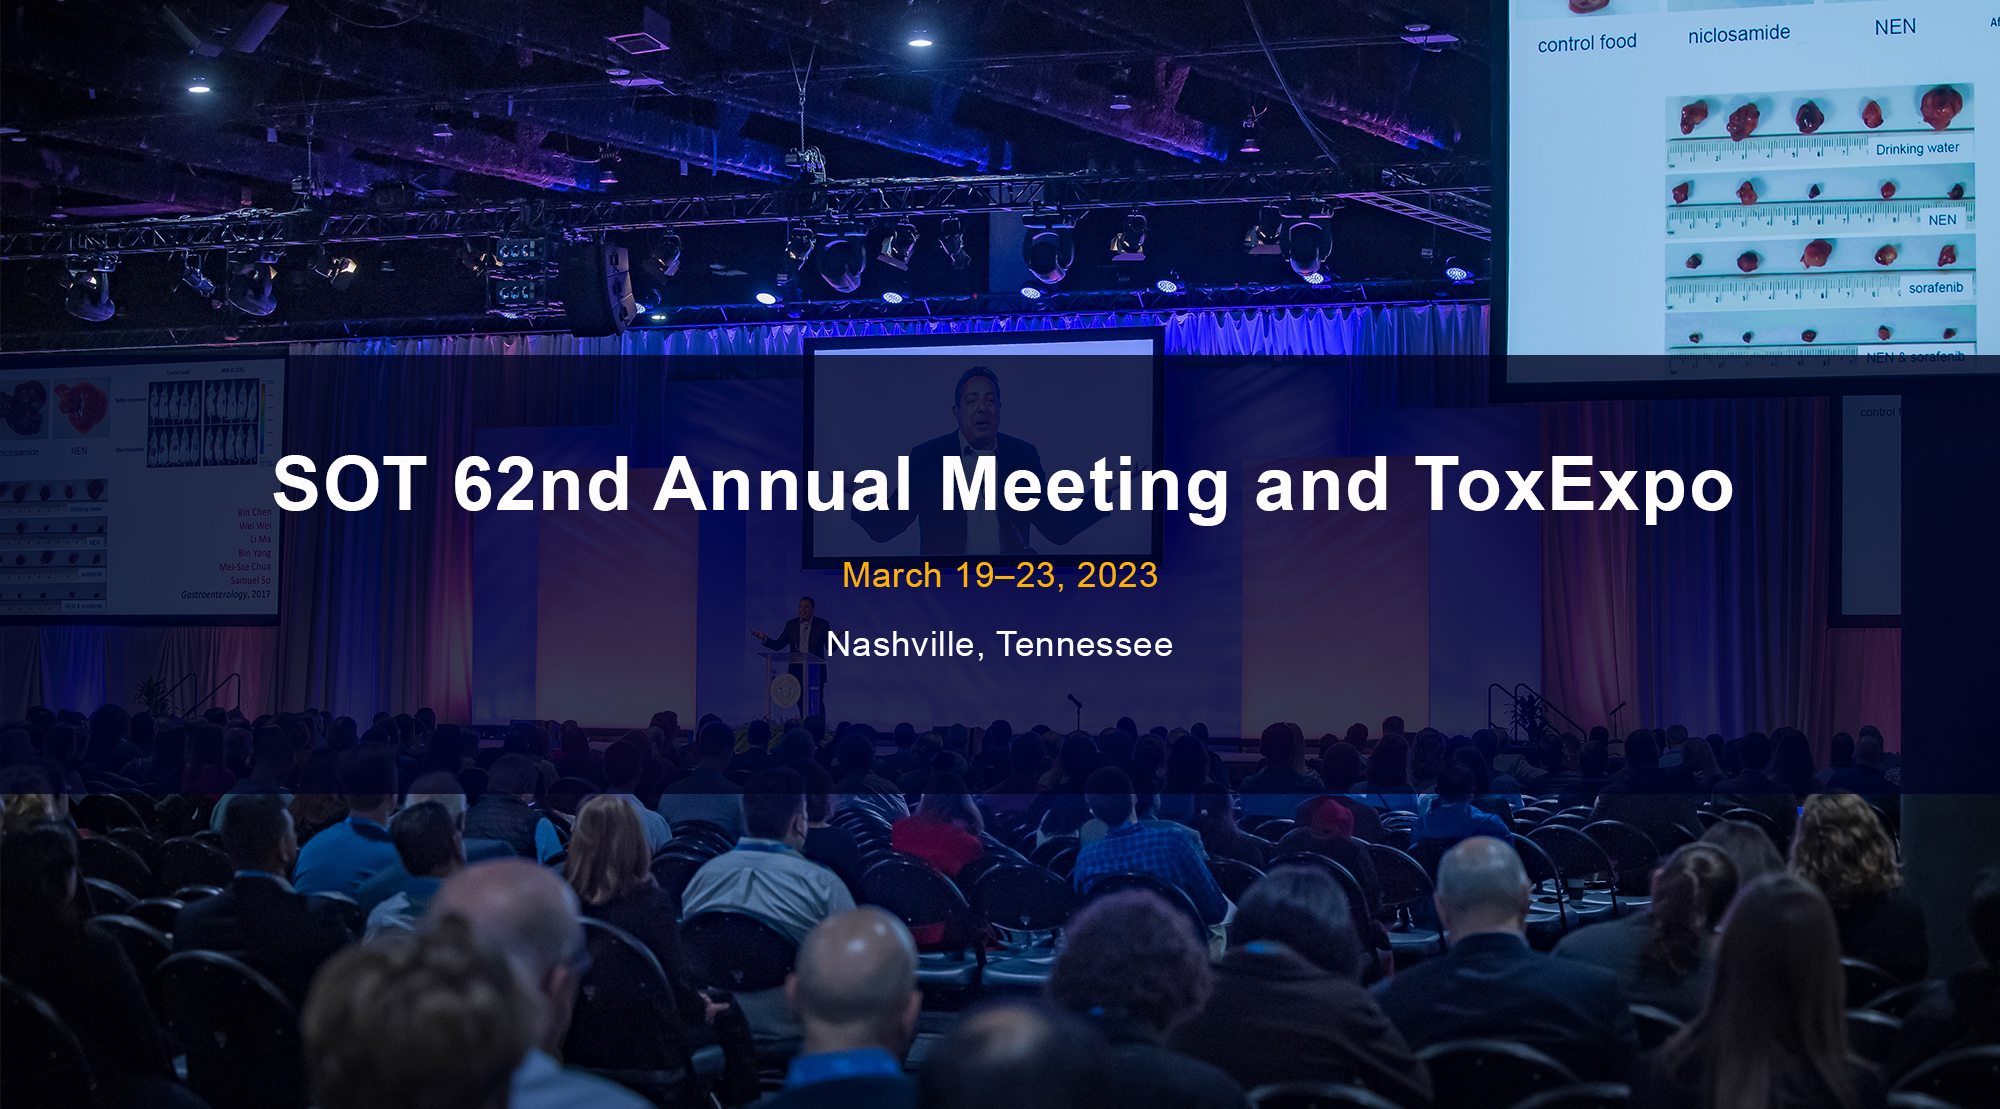 SOT 62nd Annual Meeting and ToxExpo